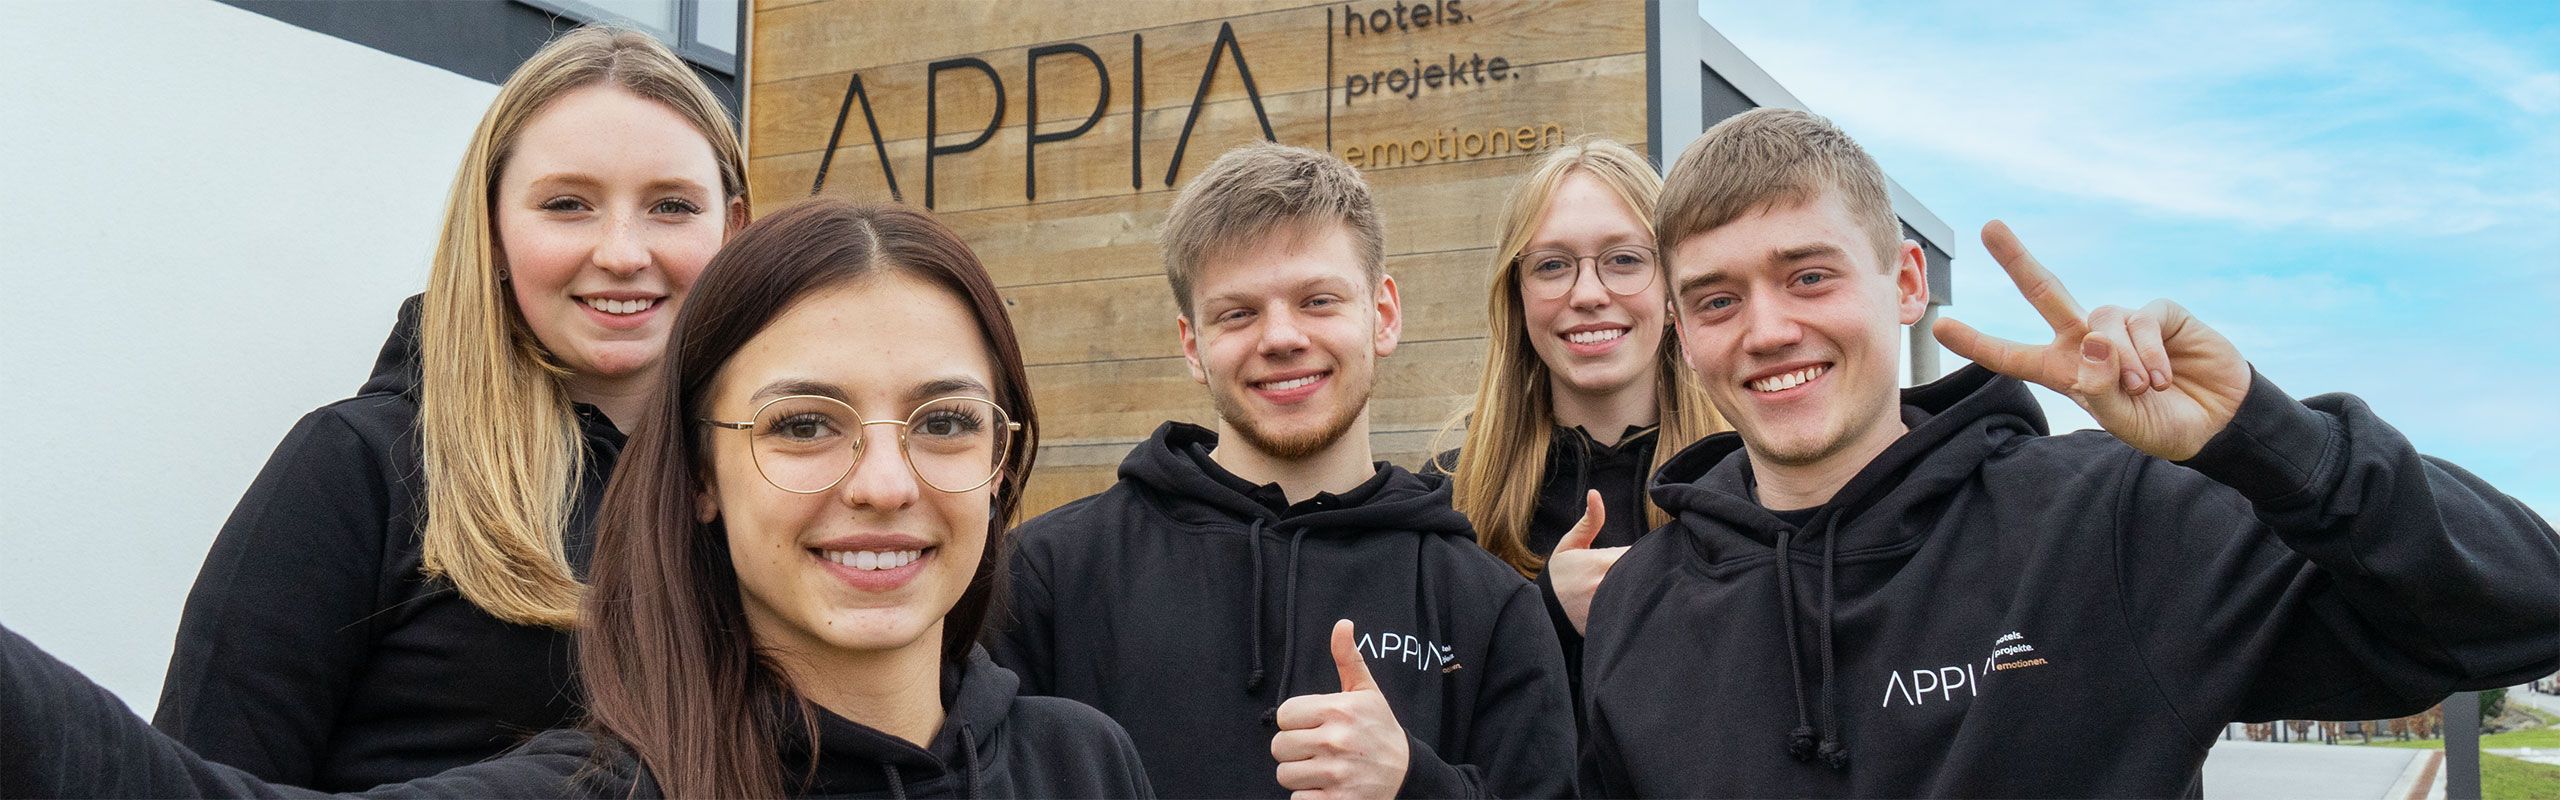 the trainees of Appia Contract GmbH